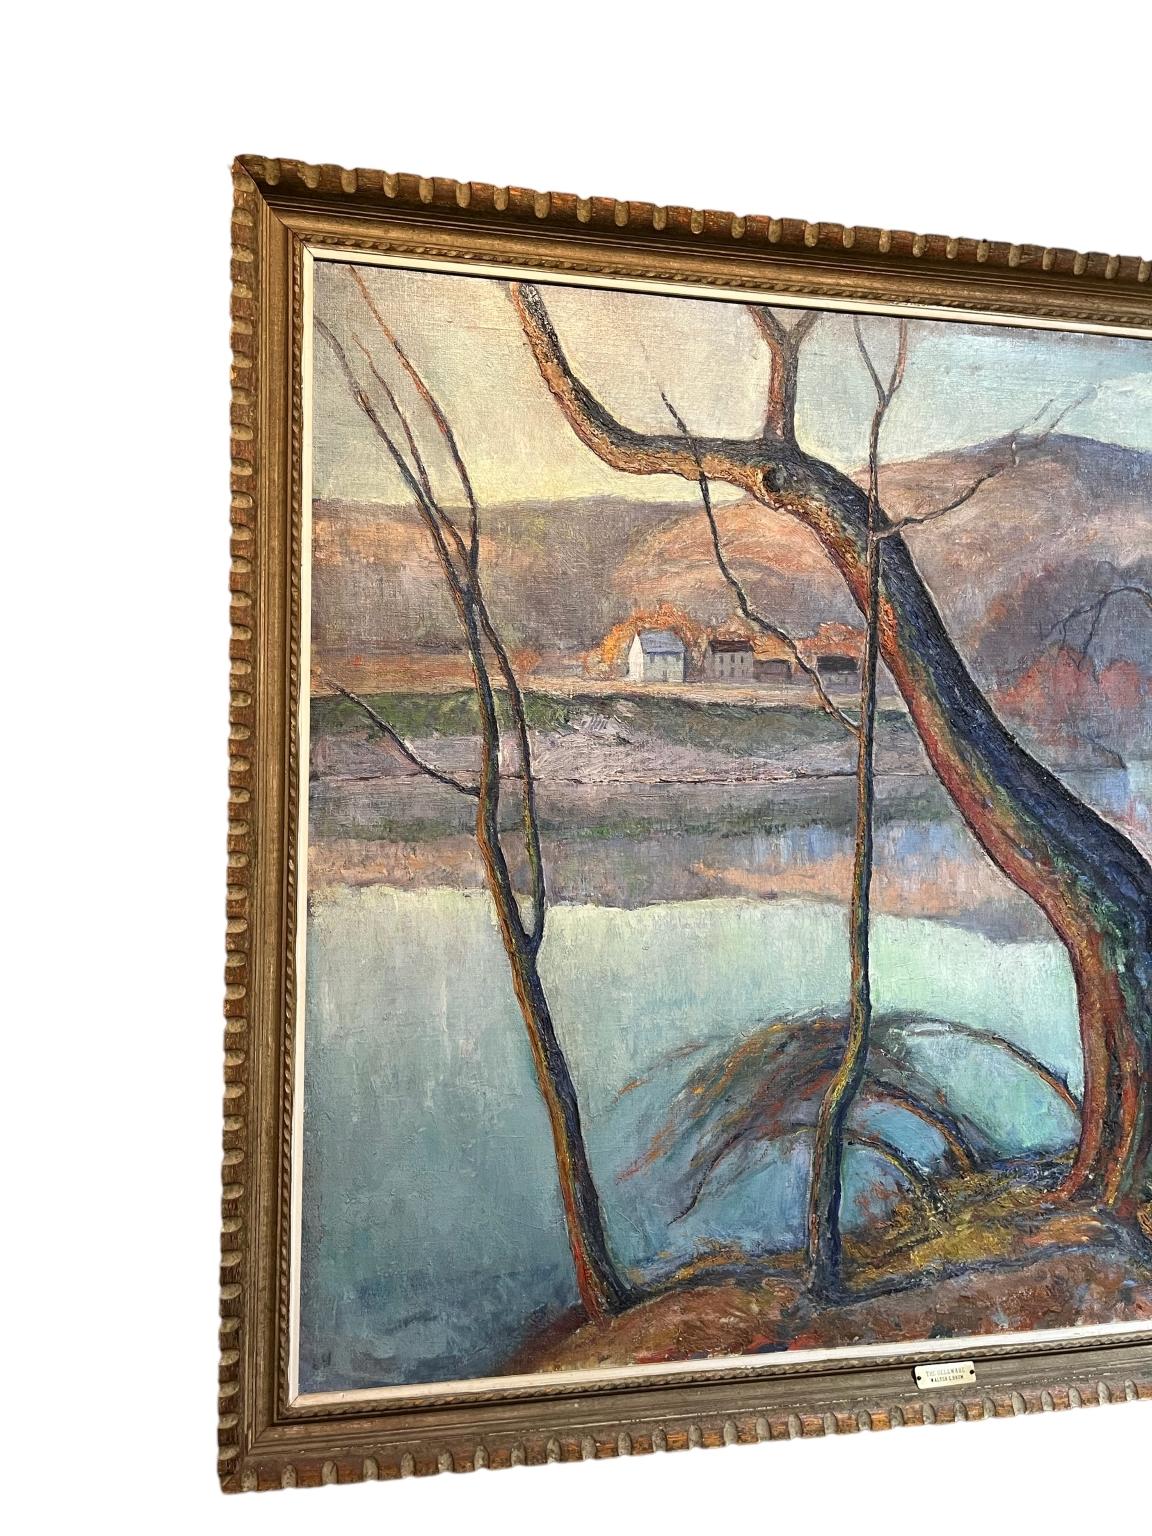 Other Walter Emerson Baum Painting Titled The Delaware Circa 1930’s-40 For Sale